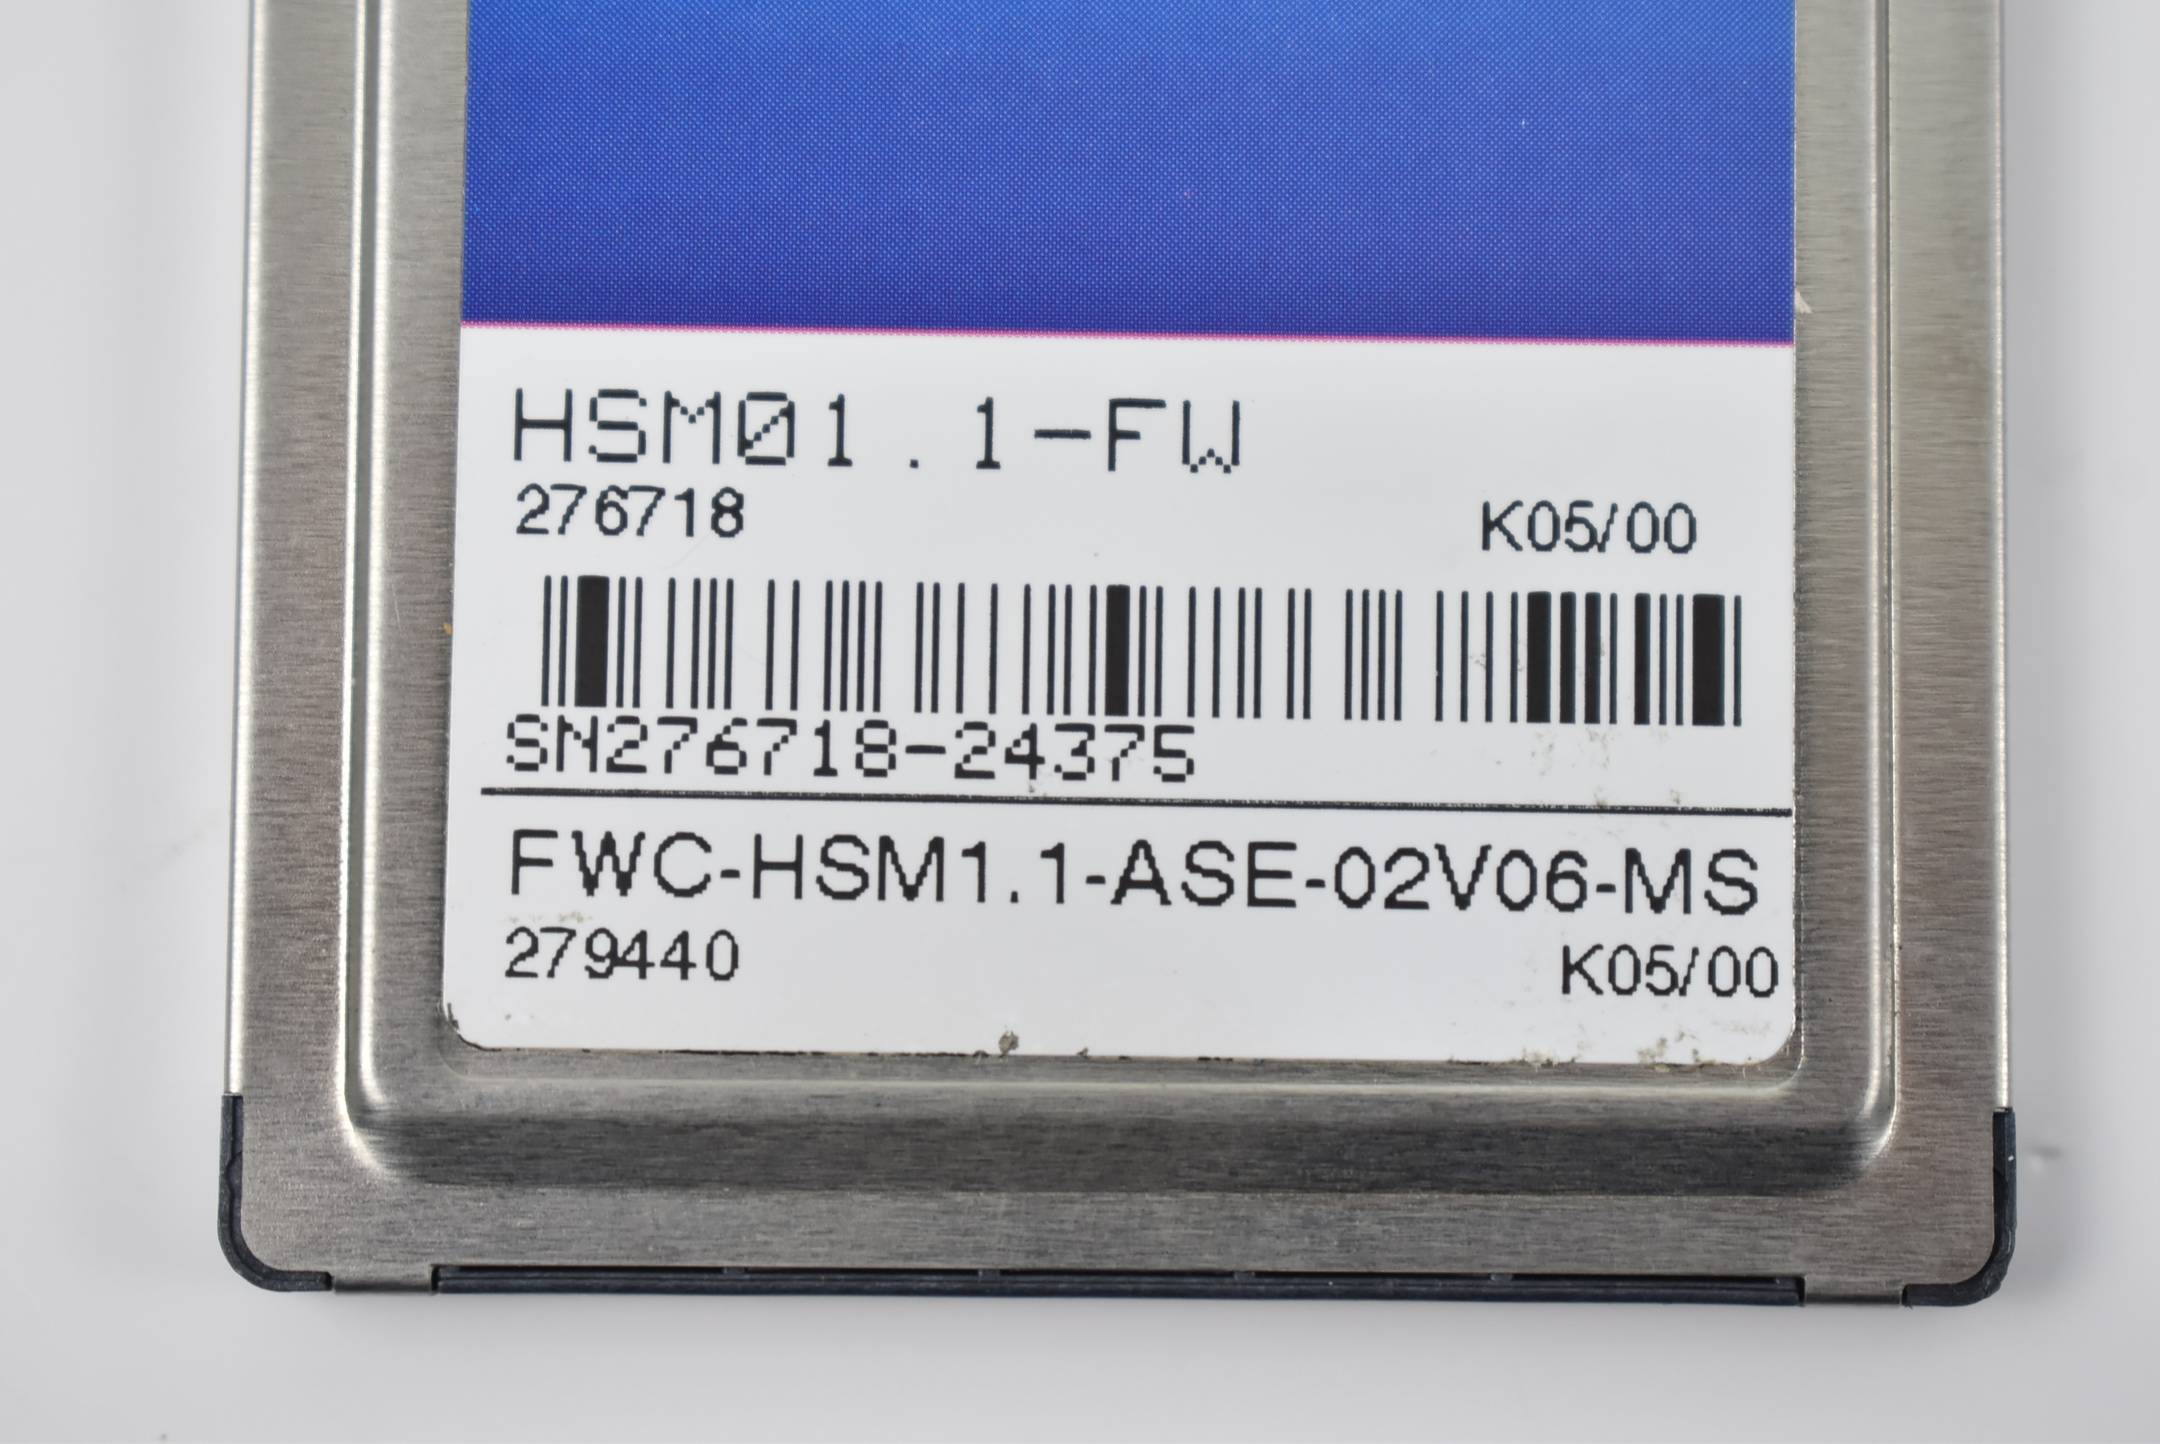 Indramat Memory Card HSM01.1-FW ( FWC-HSM1.1-ASE-02V06-MS ) 279440